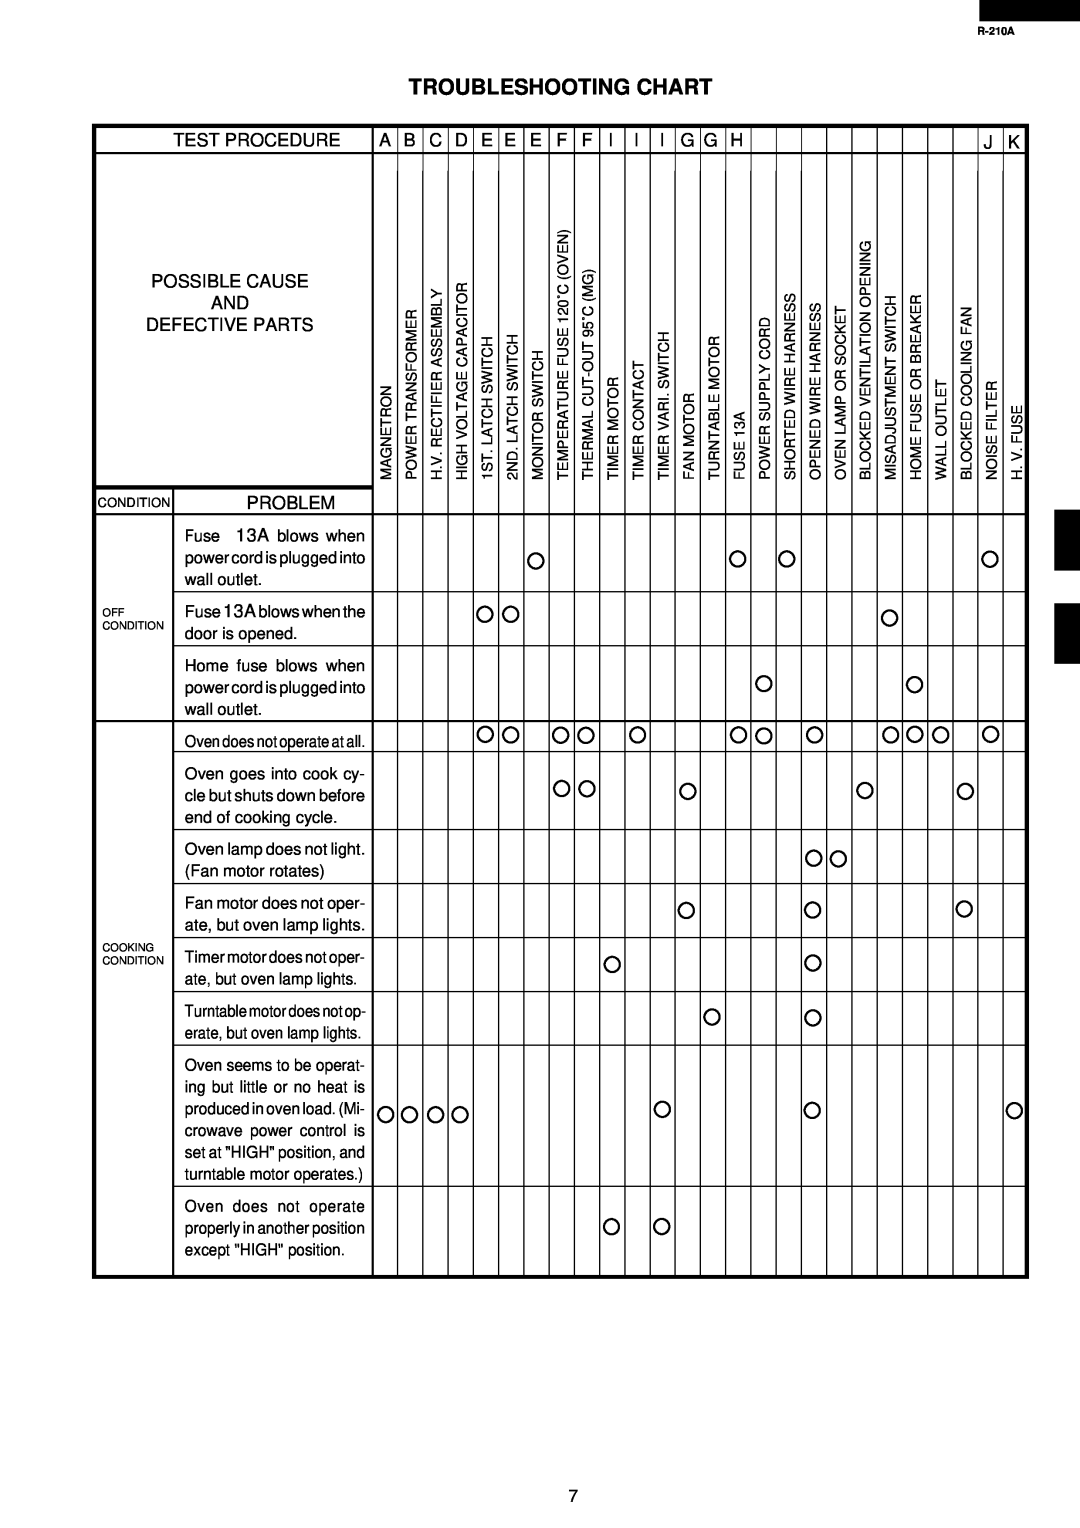 Sharp R-210A specifications Troubleshooting Chart, Test Procedure Possible Cause And Defective Parts, Problem 